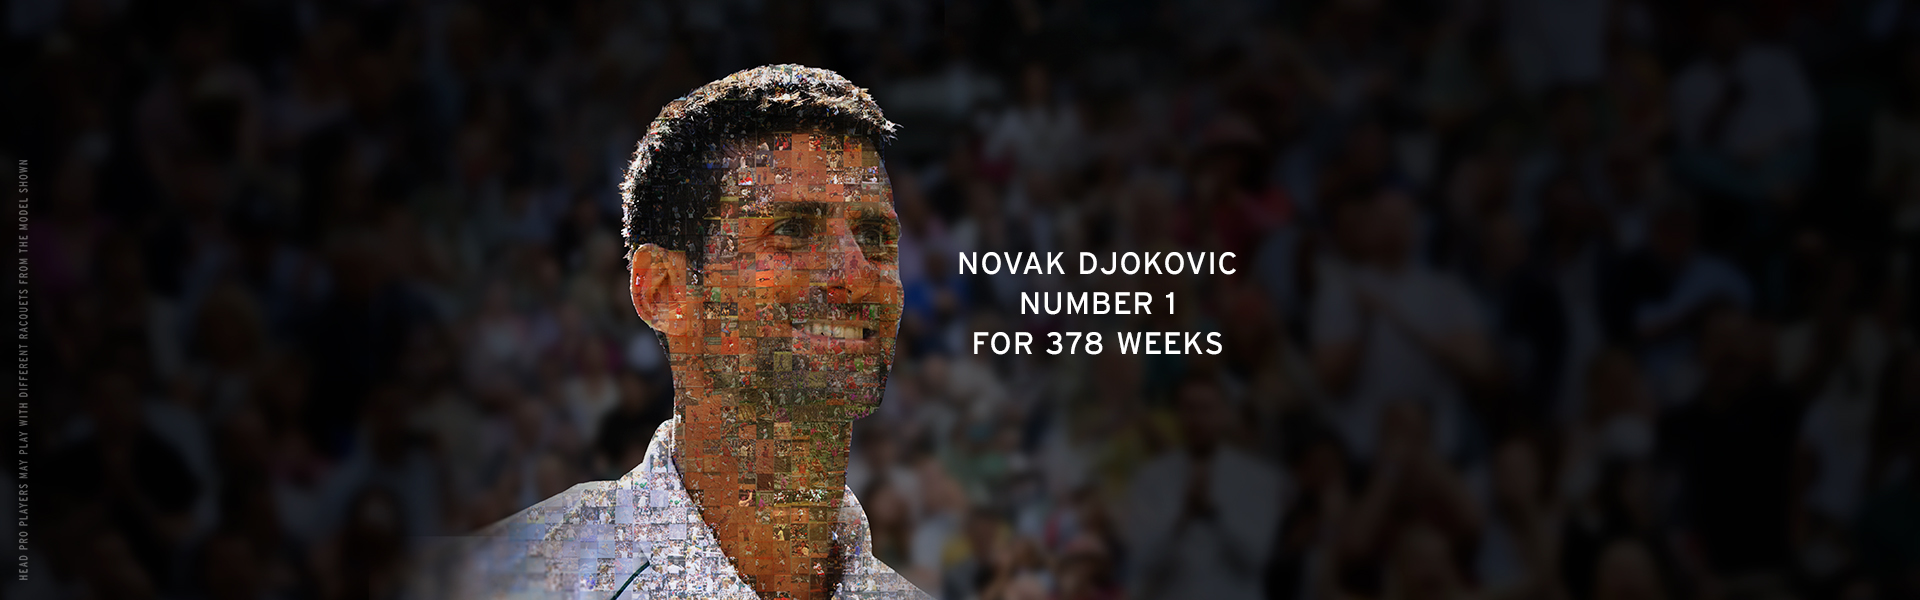 DJOKOVIC AND HEAD SET REMARKABLE RANKINGS RECORD